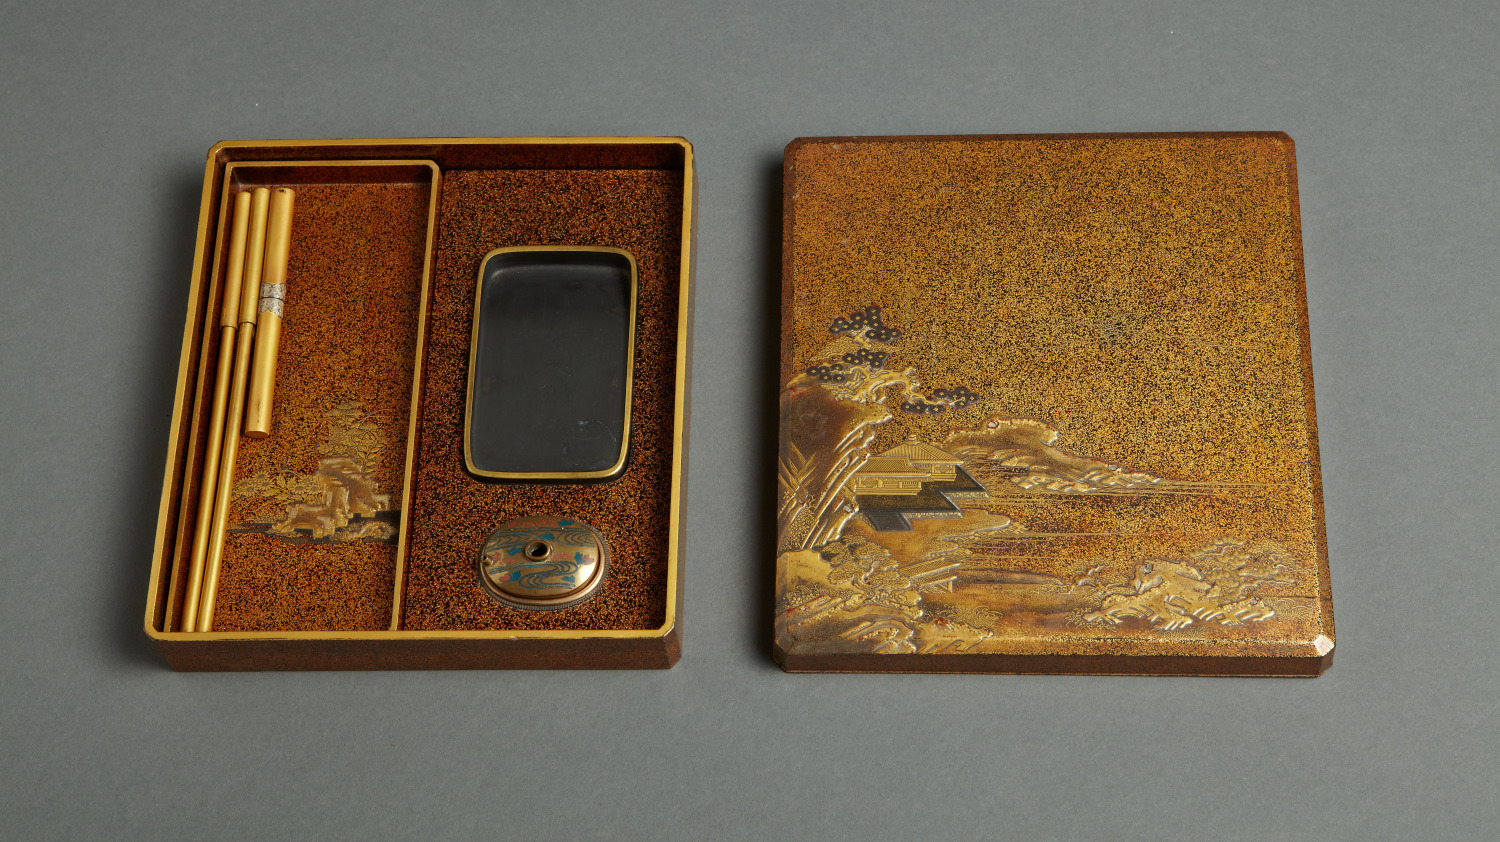 Unknown, Writing box (suzuribako), Edo period, 18th-early 19th century. Lacquer, wood and metal with decoration. Gift of Mr. Loren Neal, in memory of Ben Neal, Jr.